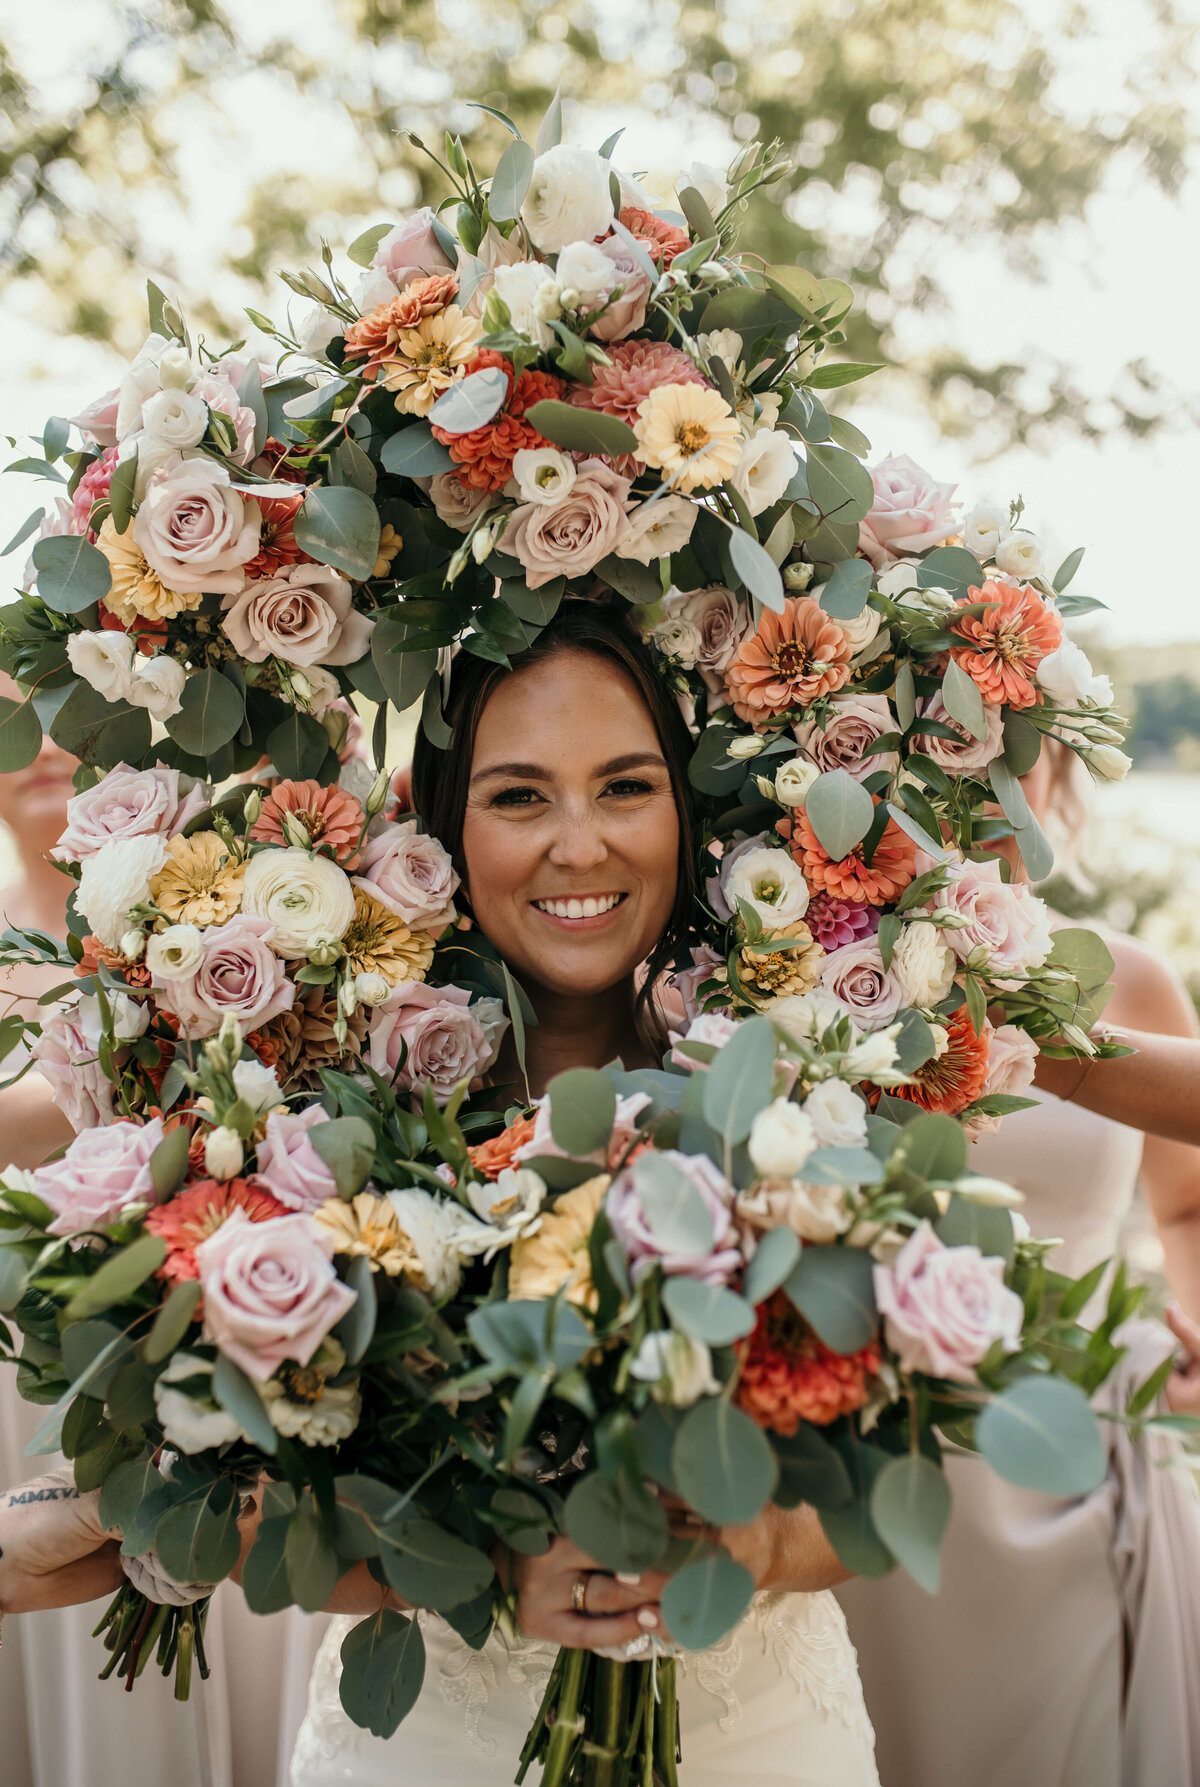 Bride smiles with flowers around her face